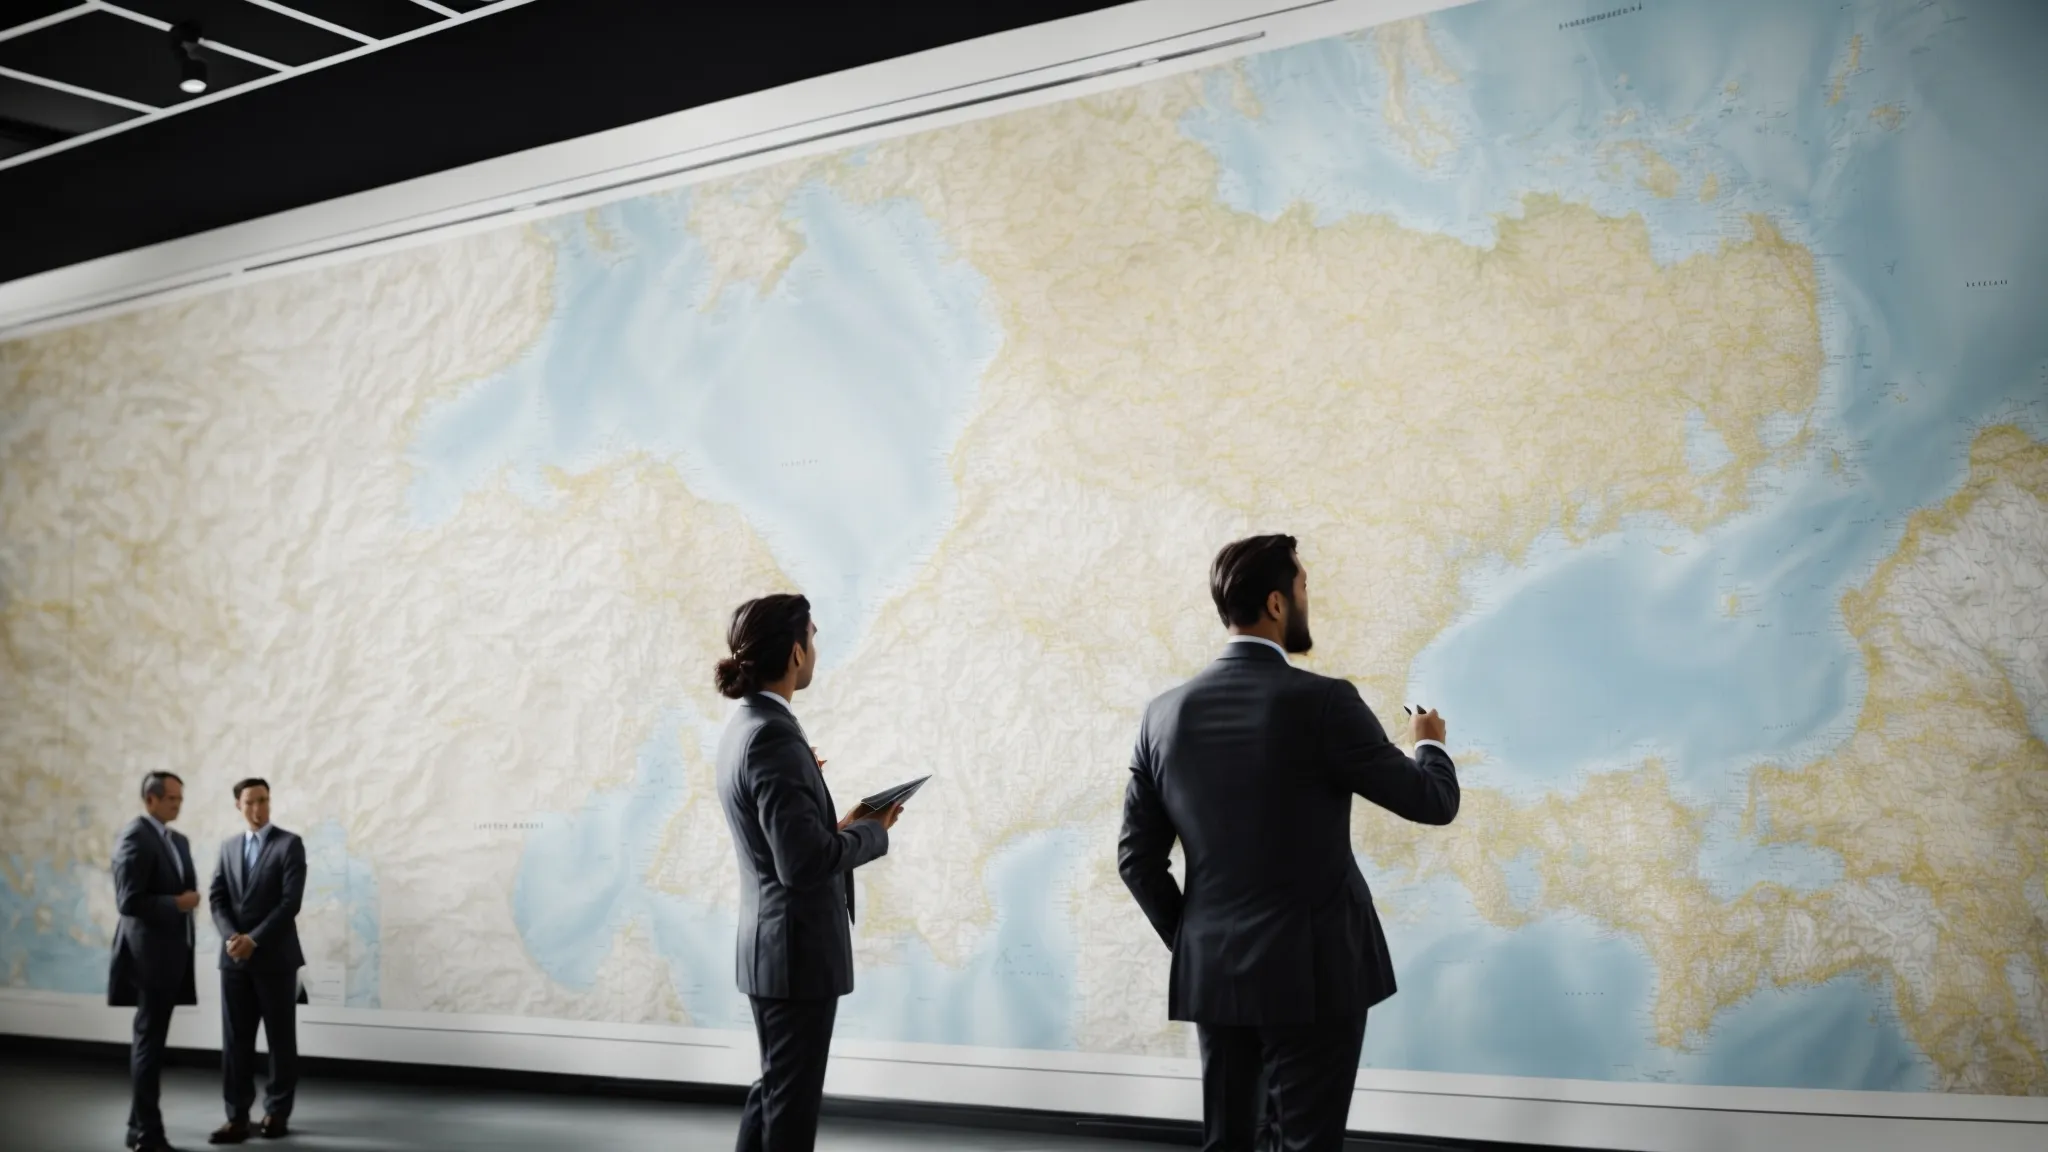 business professionals analyze a large map on the wall, marking strategic locations for local directory submissions.